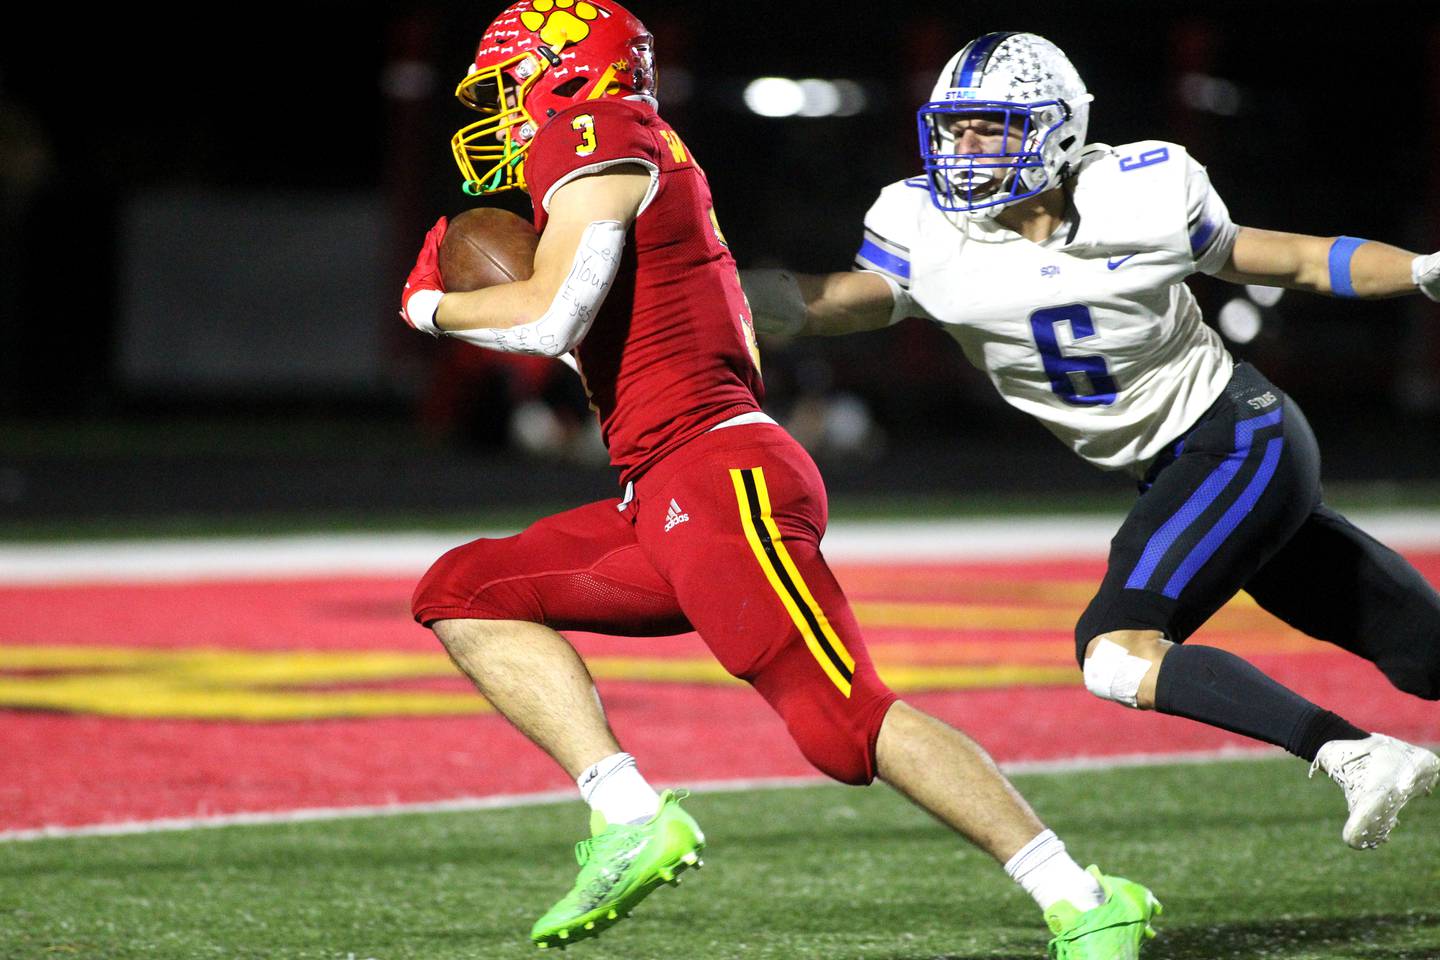 Batavia’s Ryan Whitwell (3) gets away from St. Charles North’s Drew Surges to score a touchdown in the second quarter during a game at Batavia on Friday, Oct. 21, 2022.